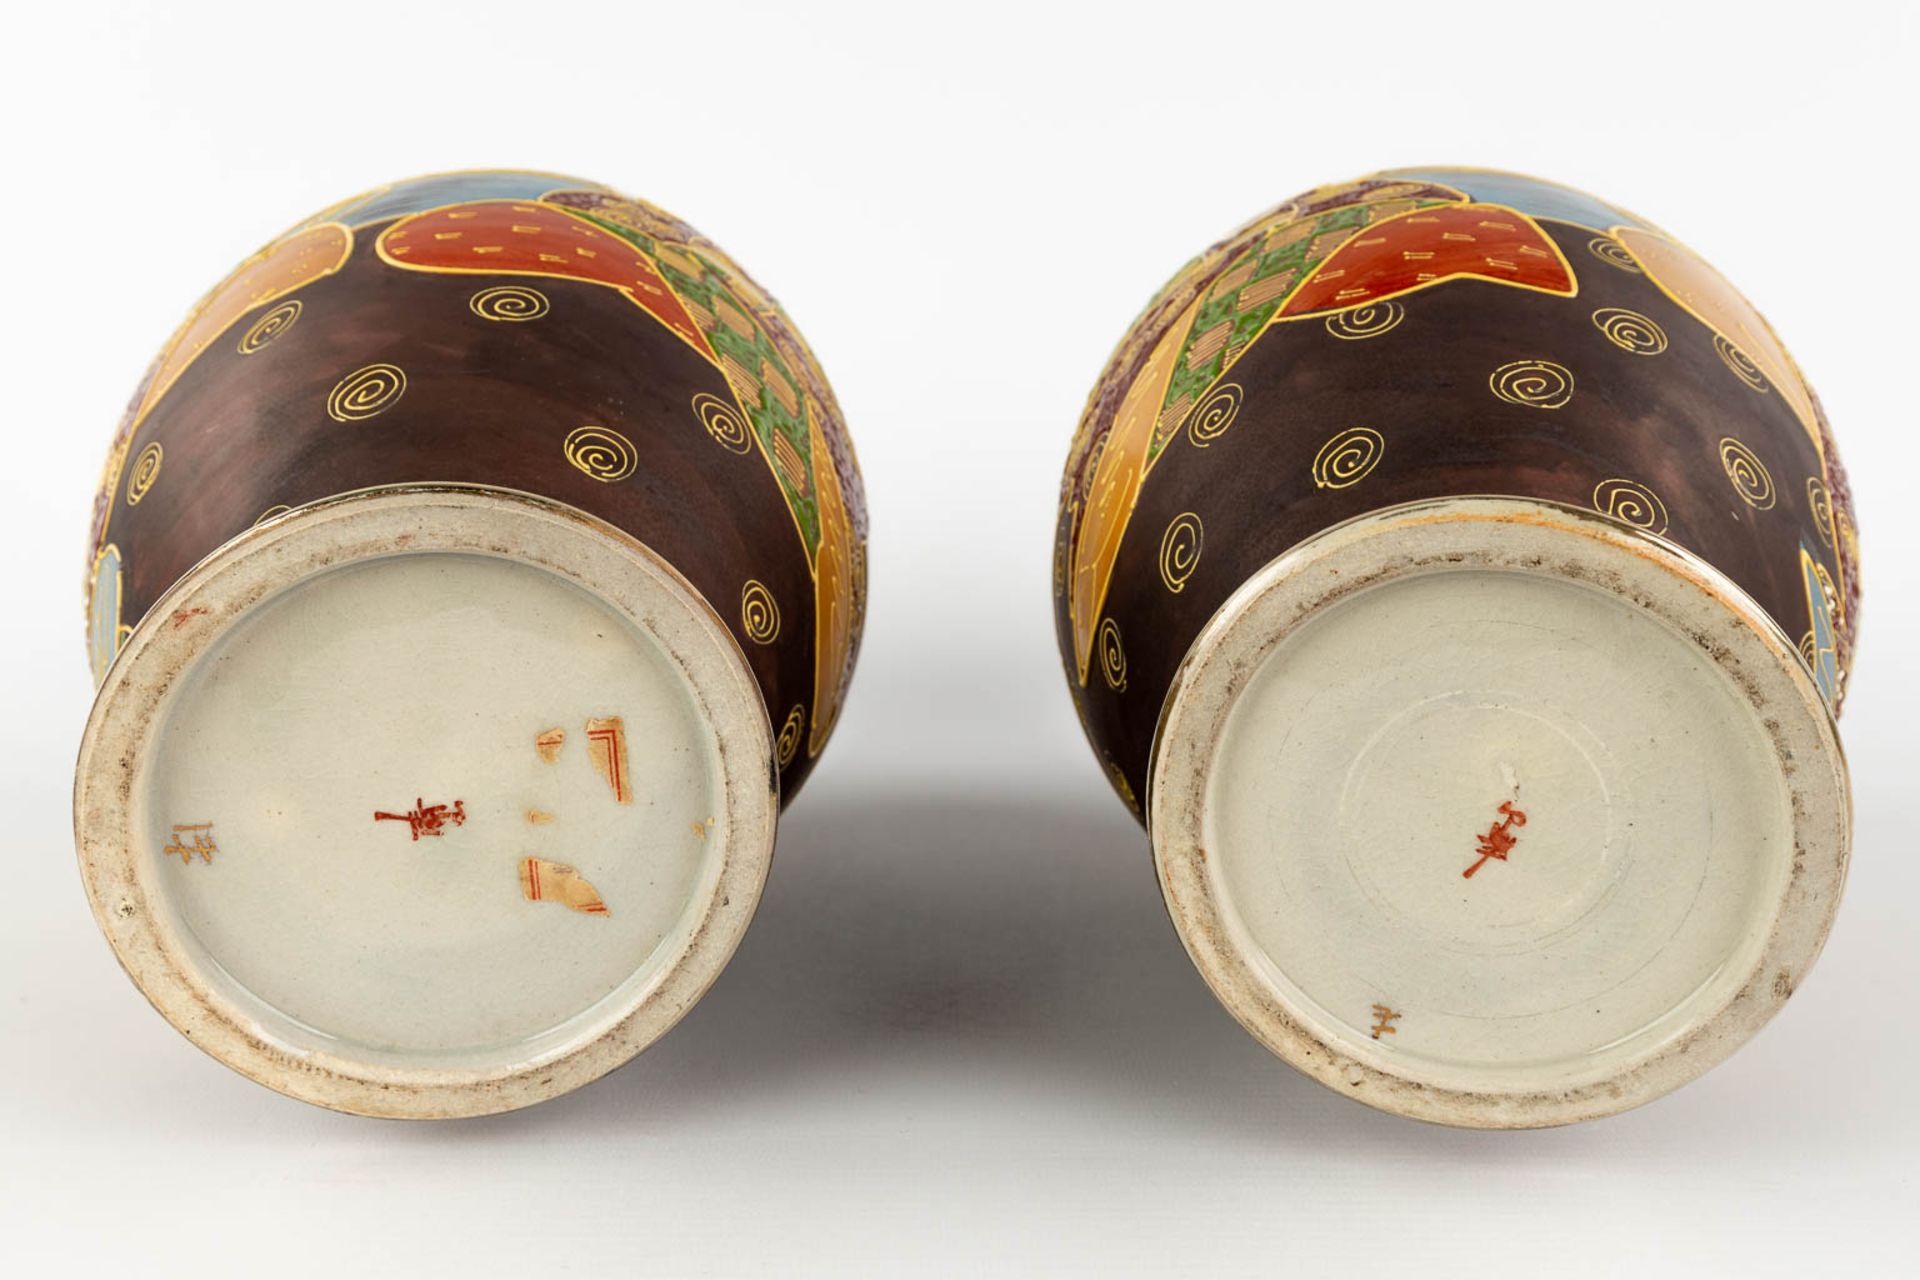 A pair of vases, a vase and jar with lid, Satsuma faience, Japan. 20th C. (H:31 x D:19 cm) - Image 10 of 19